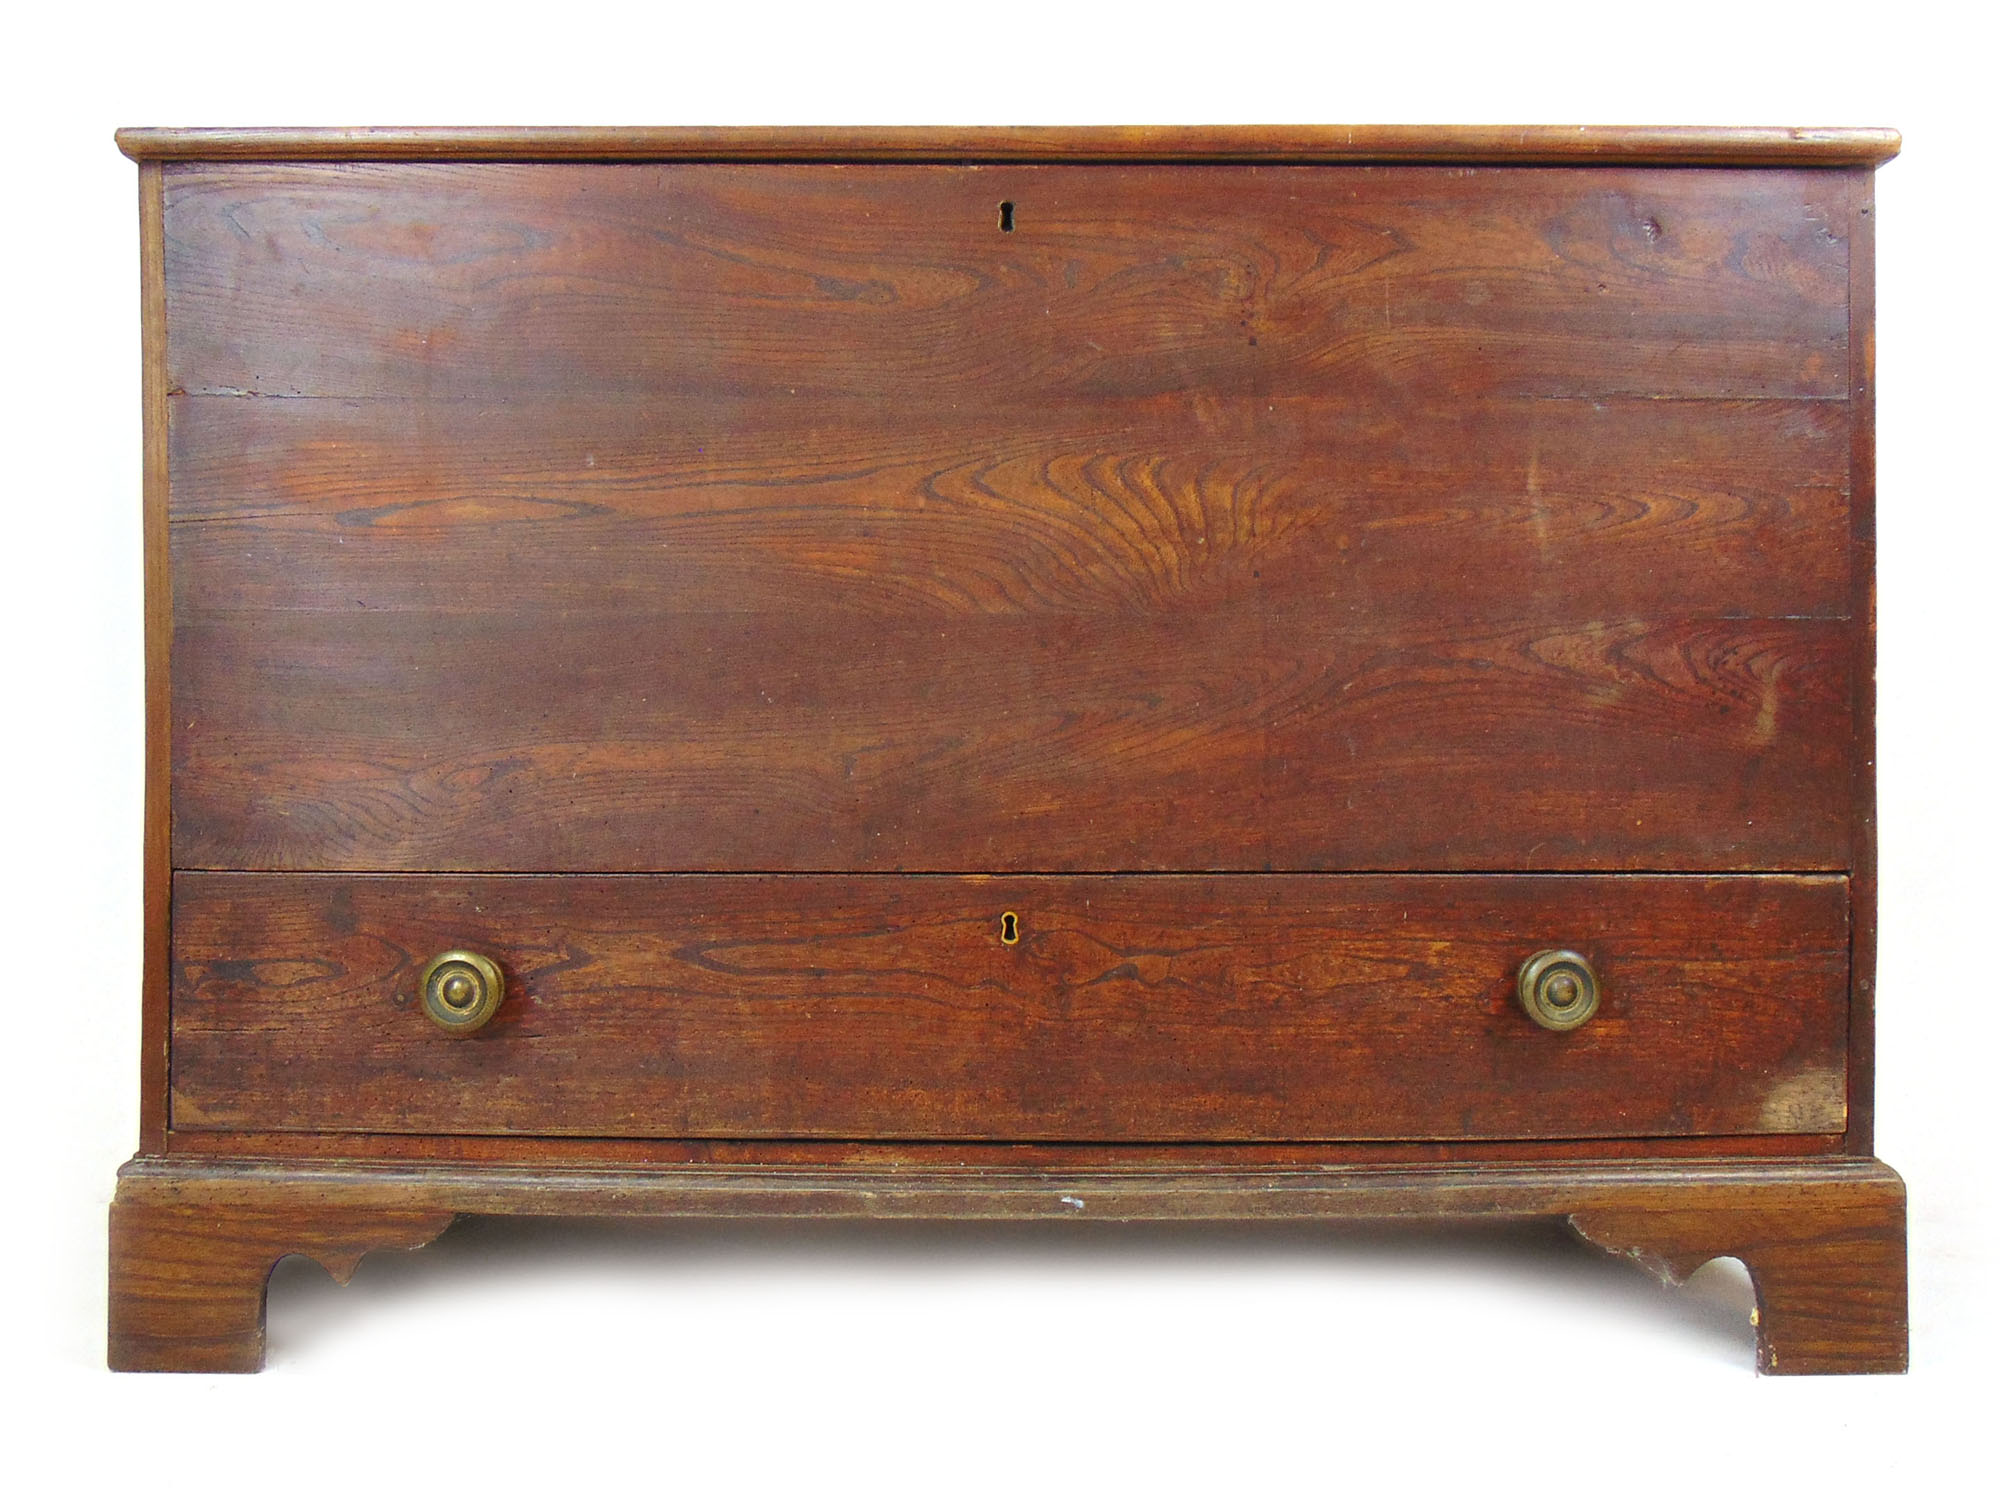 An 18th century elm mule chest, - Image 2 of 2